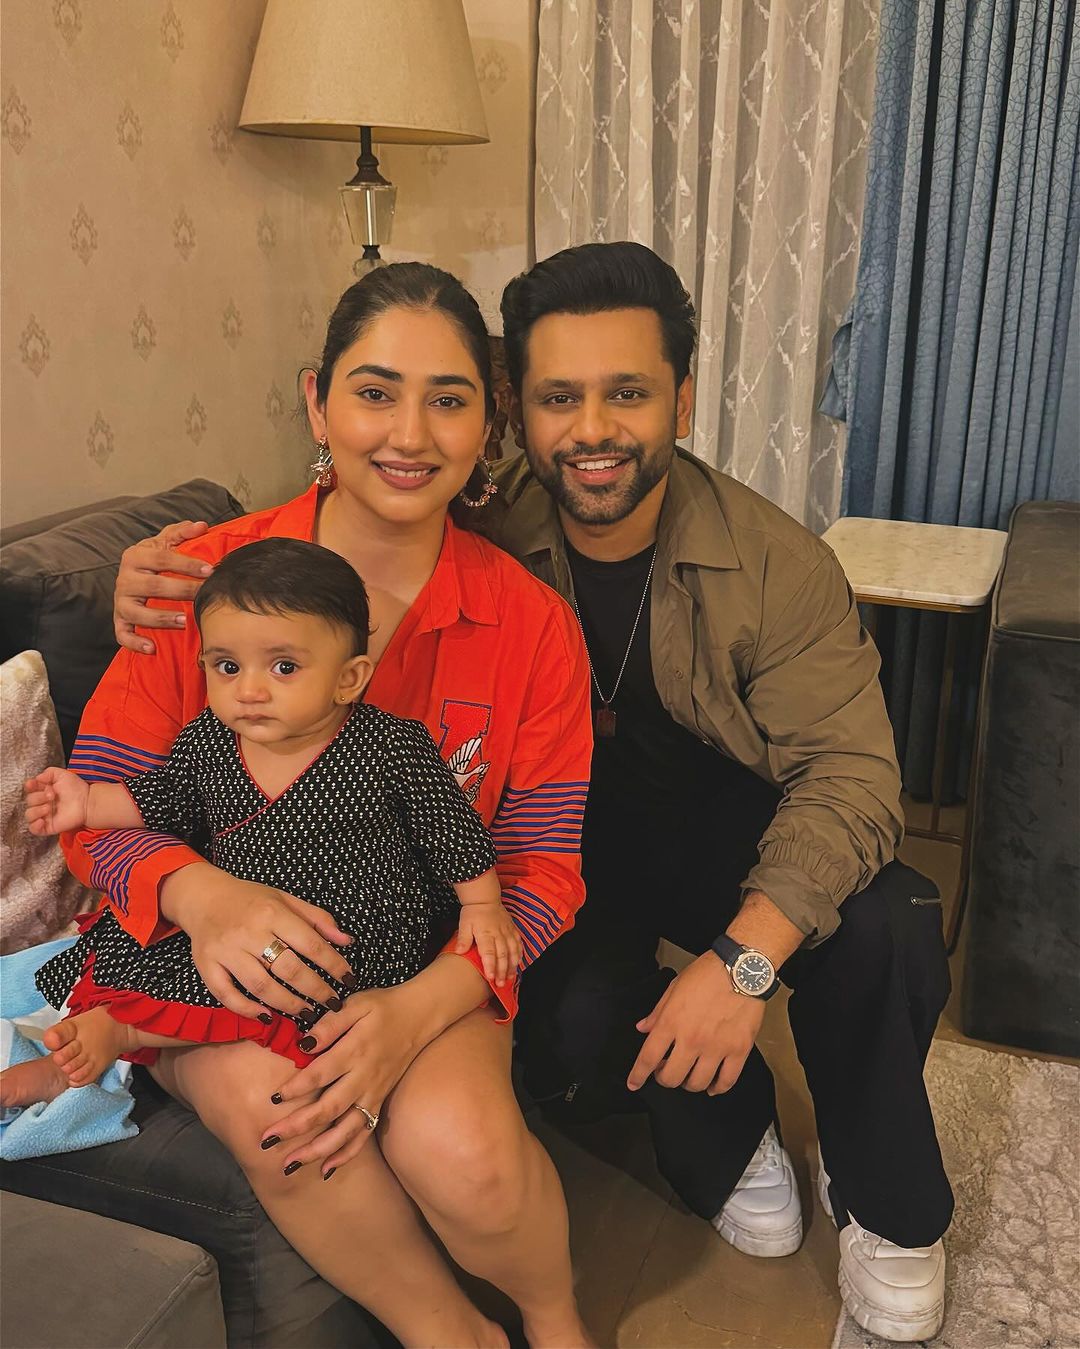 Adorable Couple Rahul Vaidya And Disha Parmar Celebrate Their 3rd Anniversary With Their Little Bundle. See How The Singer Thanks His Wife!